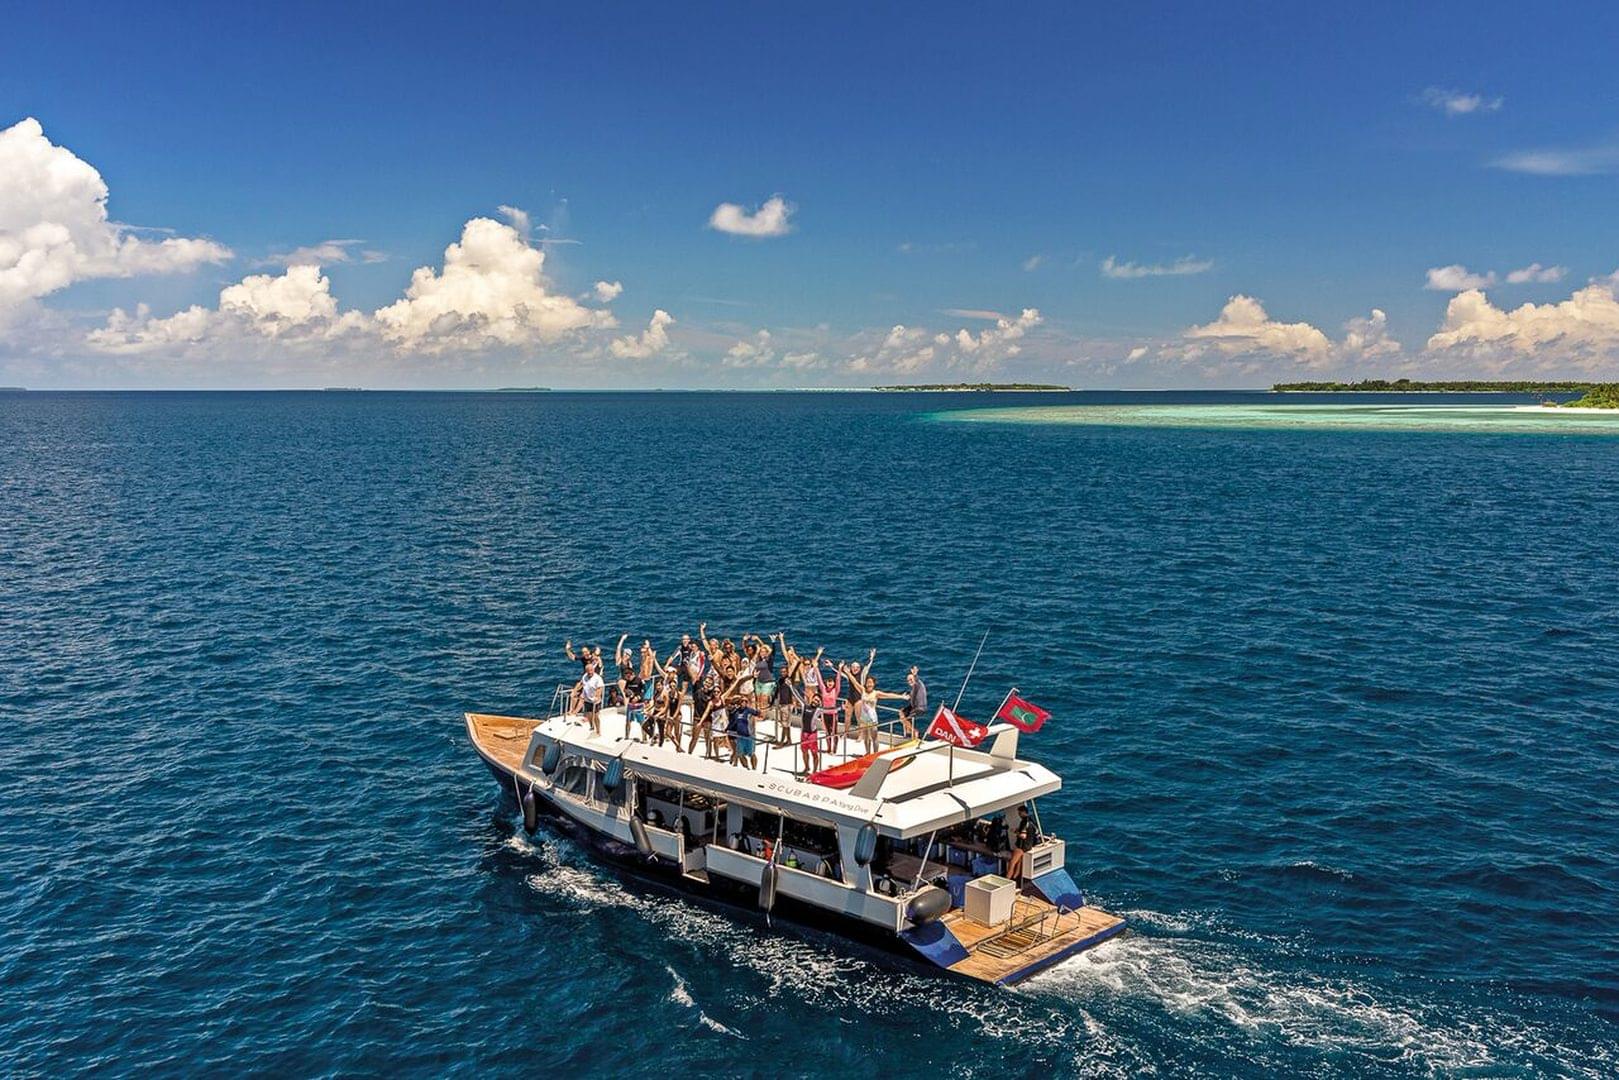 A large group of PADI scuba divers celebrating and having fun on the top deck of a small diving liveaboard while on vacation